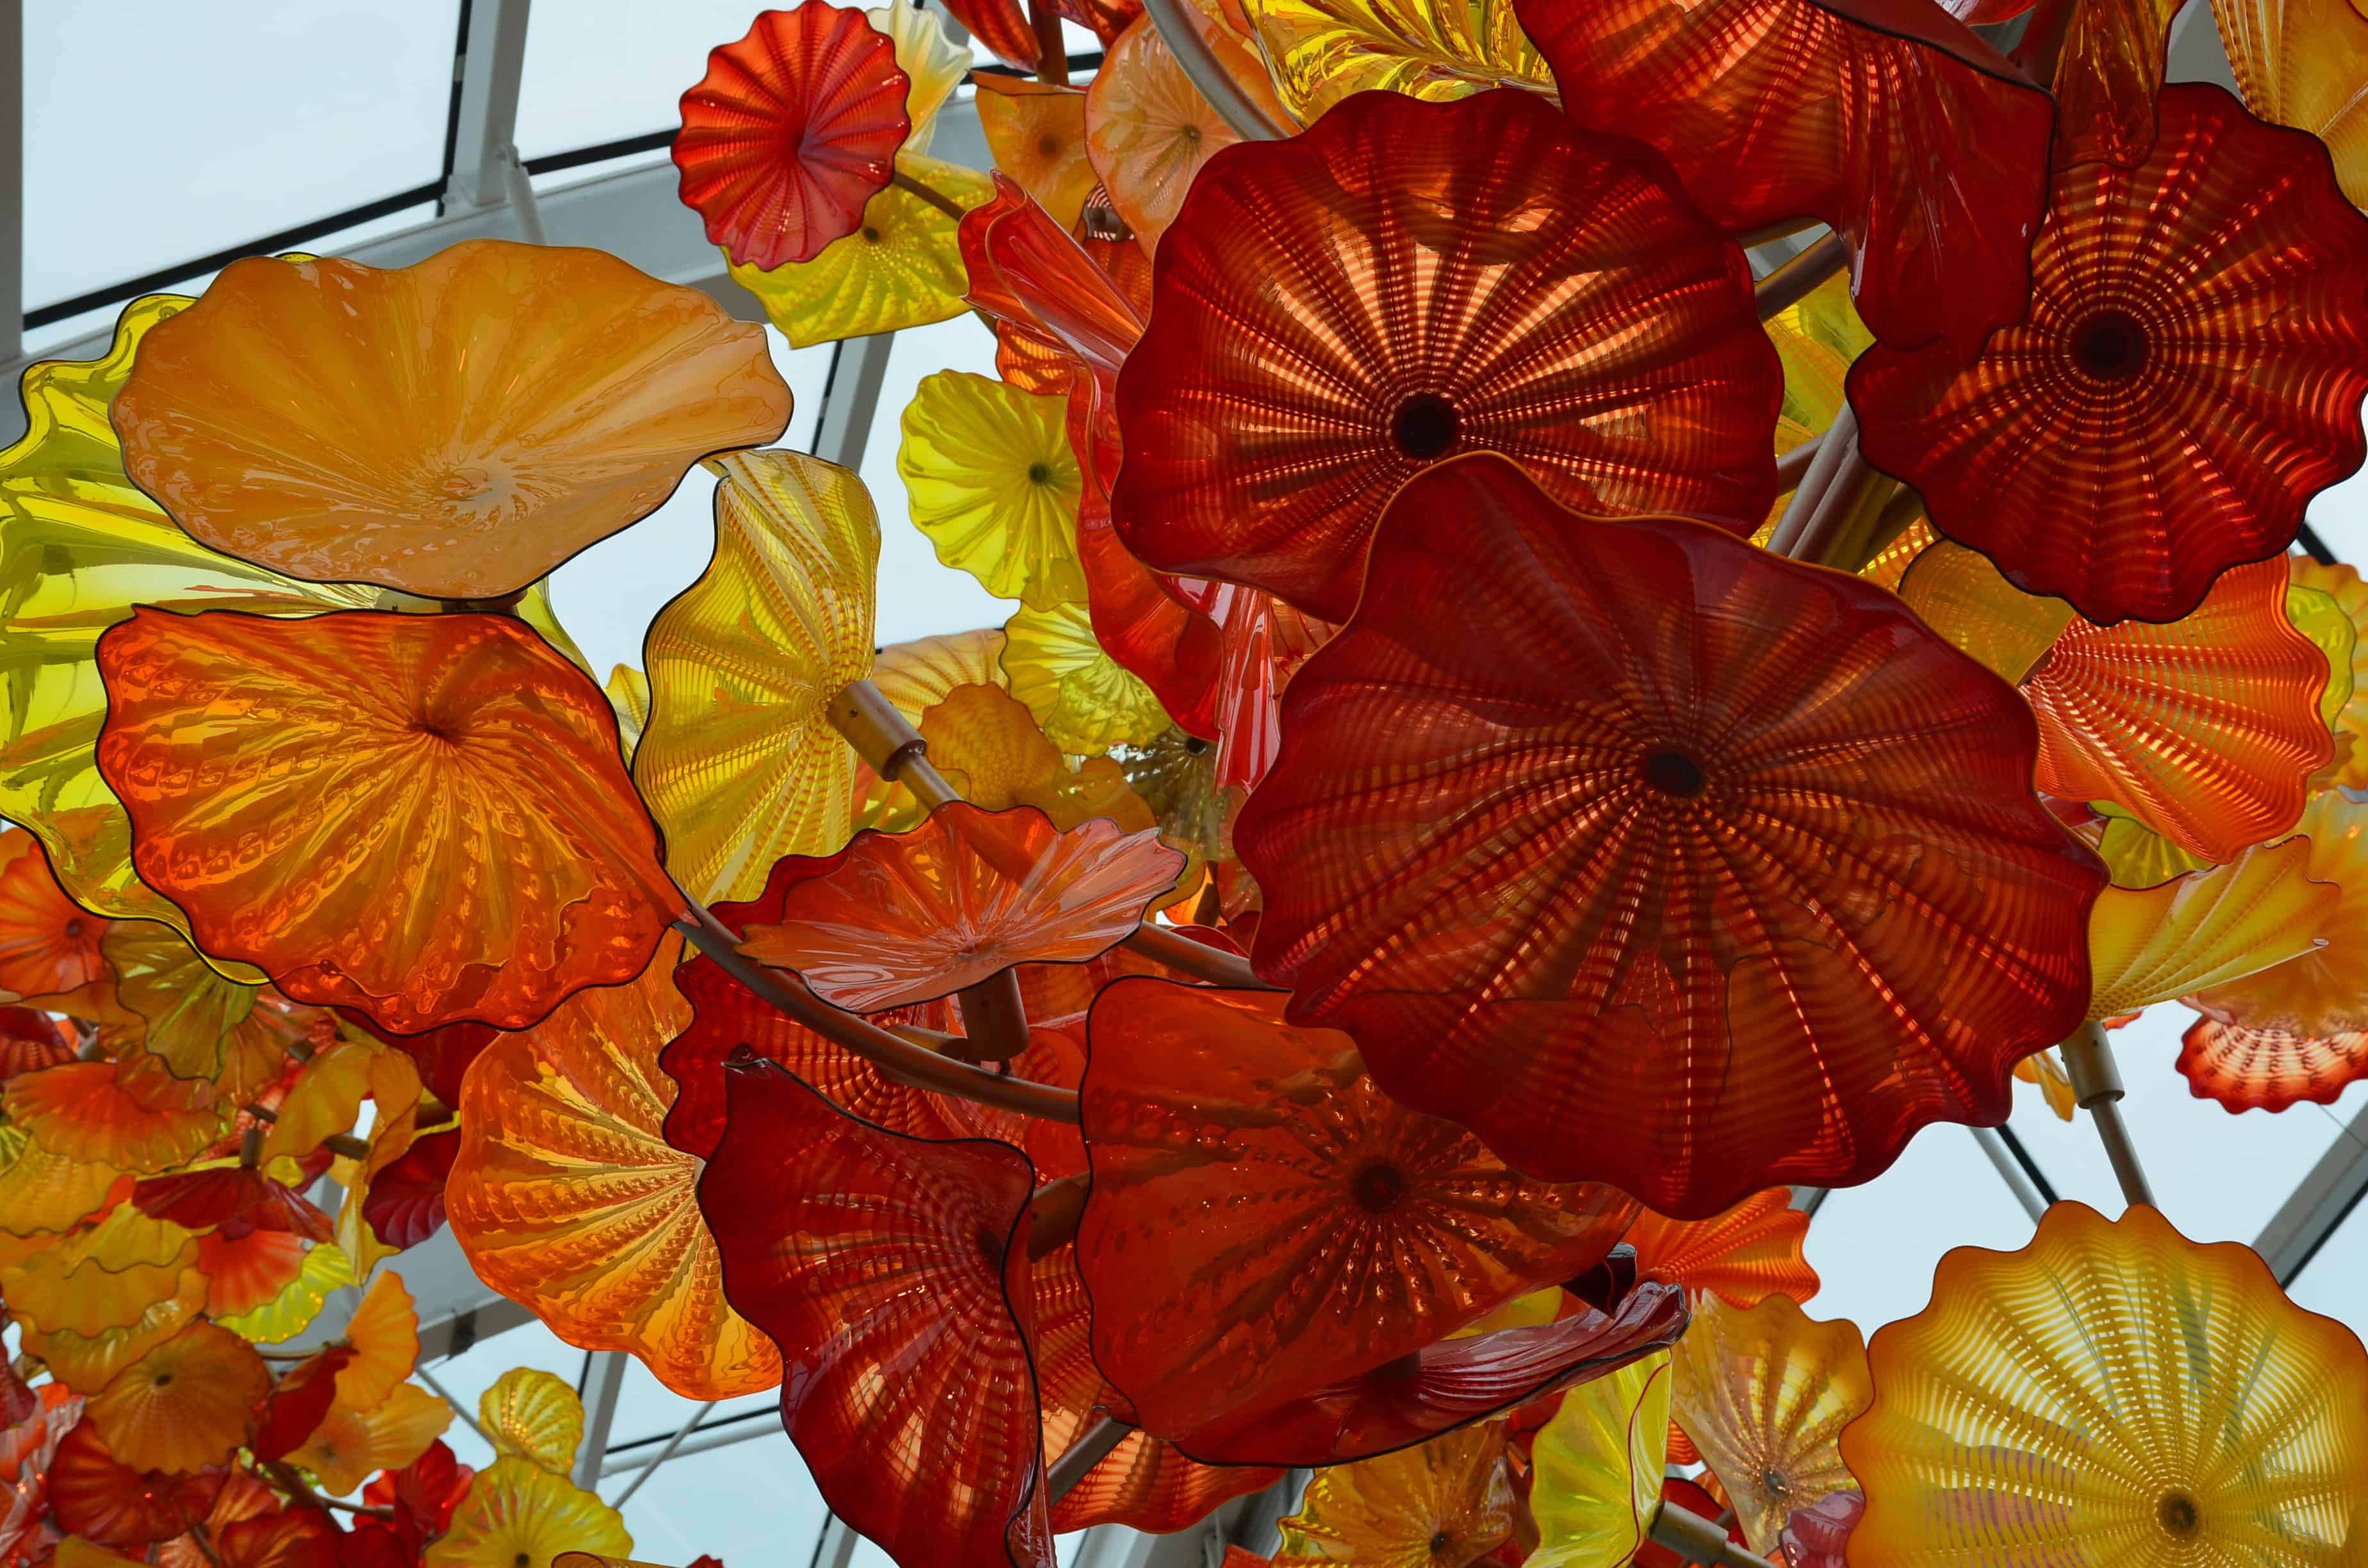 Closeup of the artwork in the Glasshouse at Chihuly Garden and Glass in Seattle, Washington